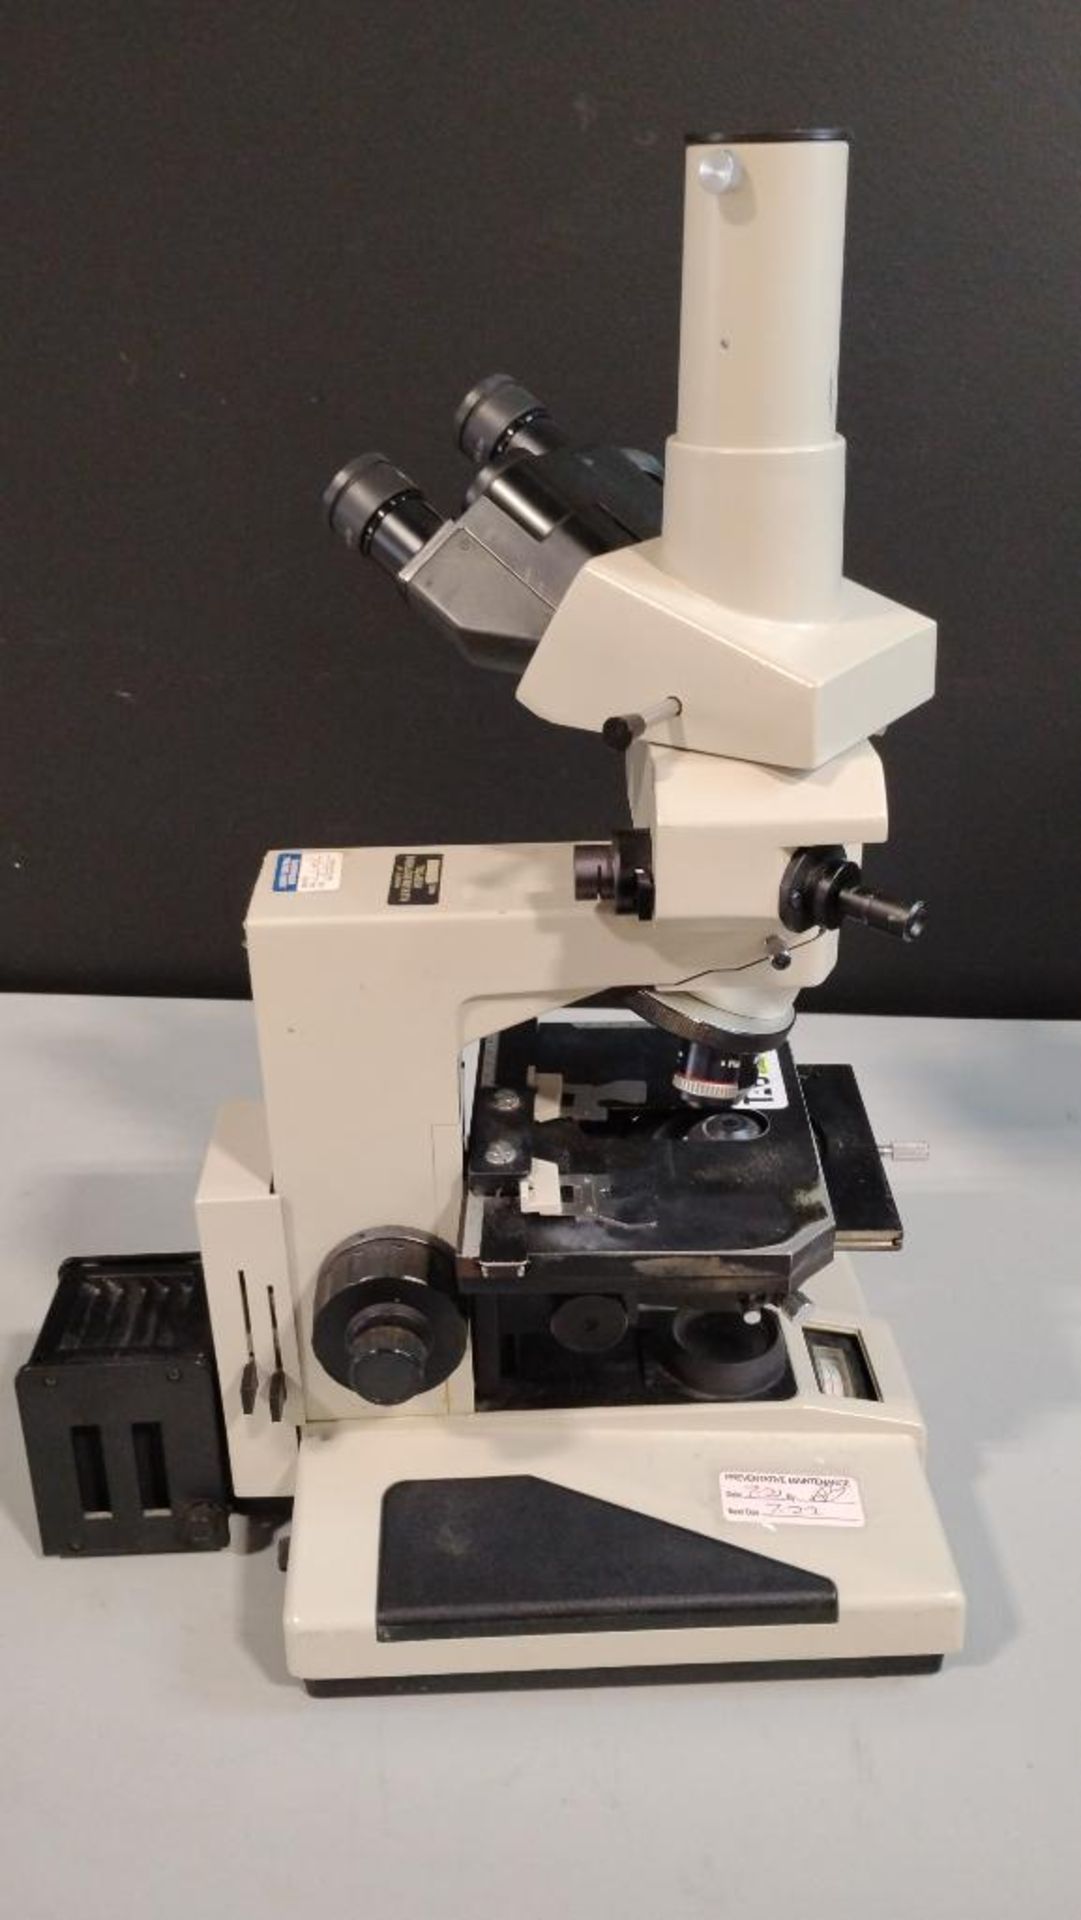 NIKON OPTIPHOT LAB MICROSCOPE WITH 2 OBJECTIVES - Image 4 of 4